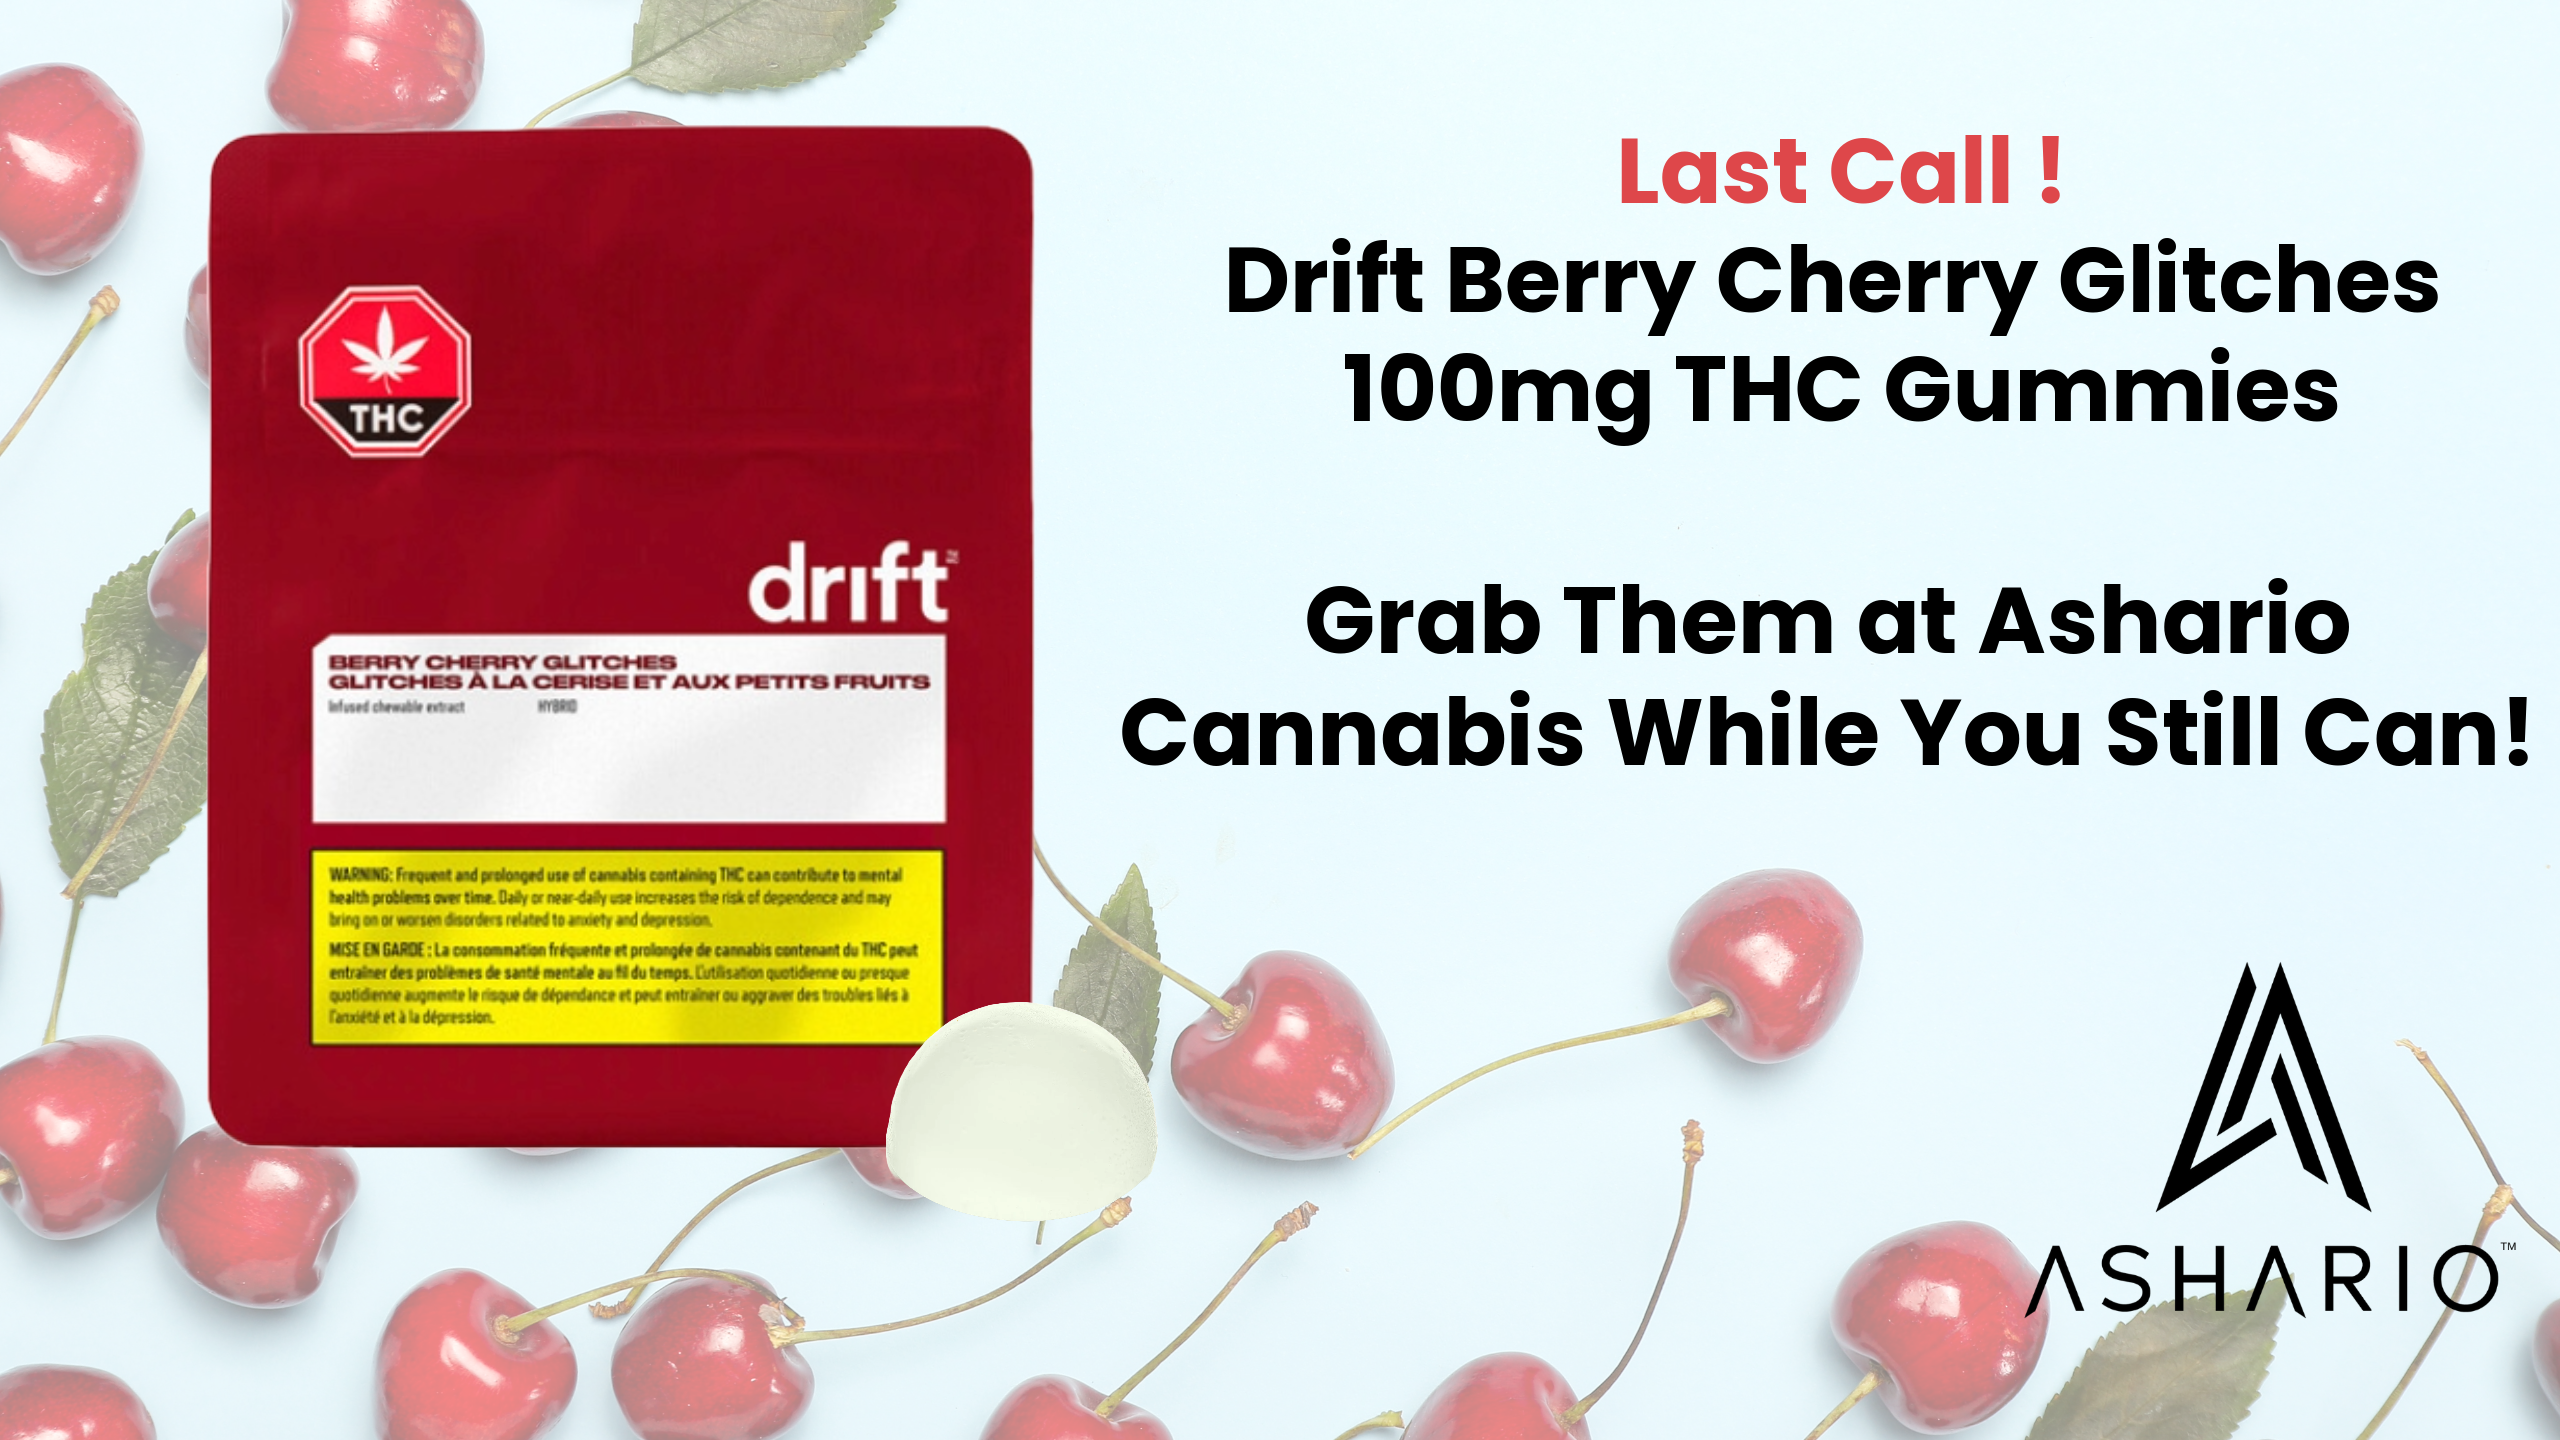 The Last Chance for Drift Berry Cherry Glitches 100mg THC Gummies: Why You Should Snag A Bag Before It's Too Late!